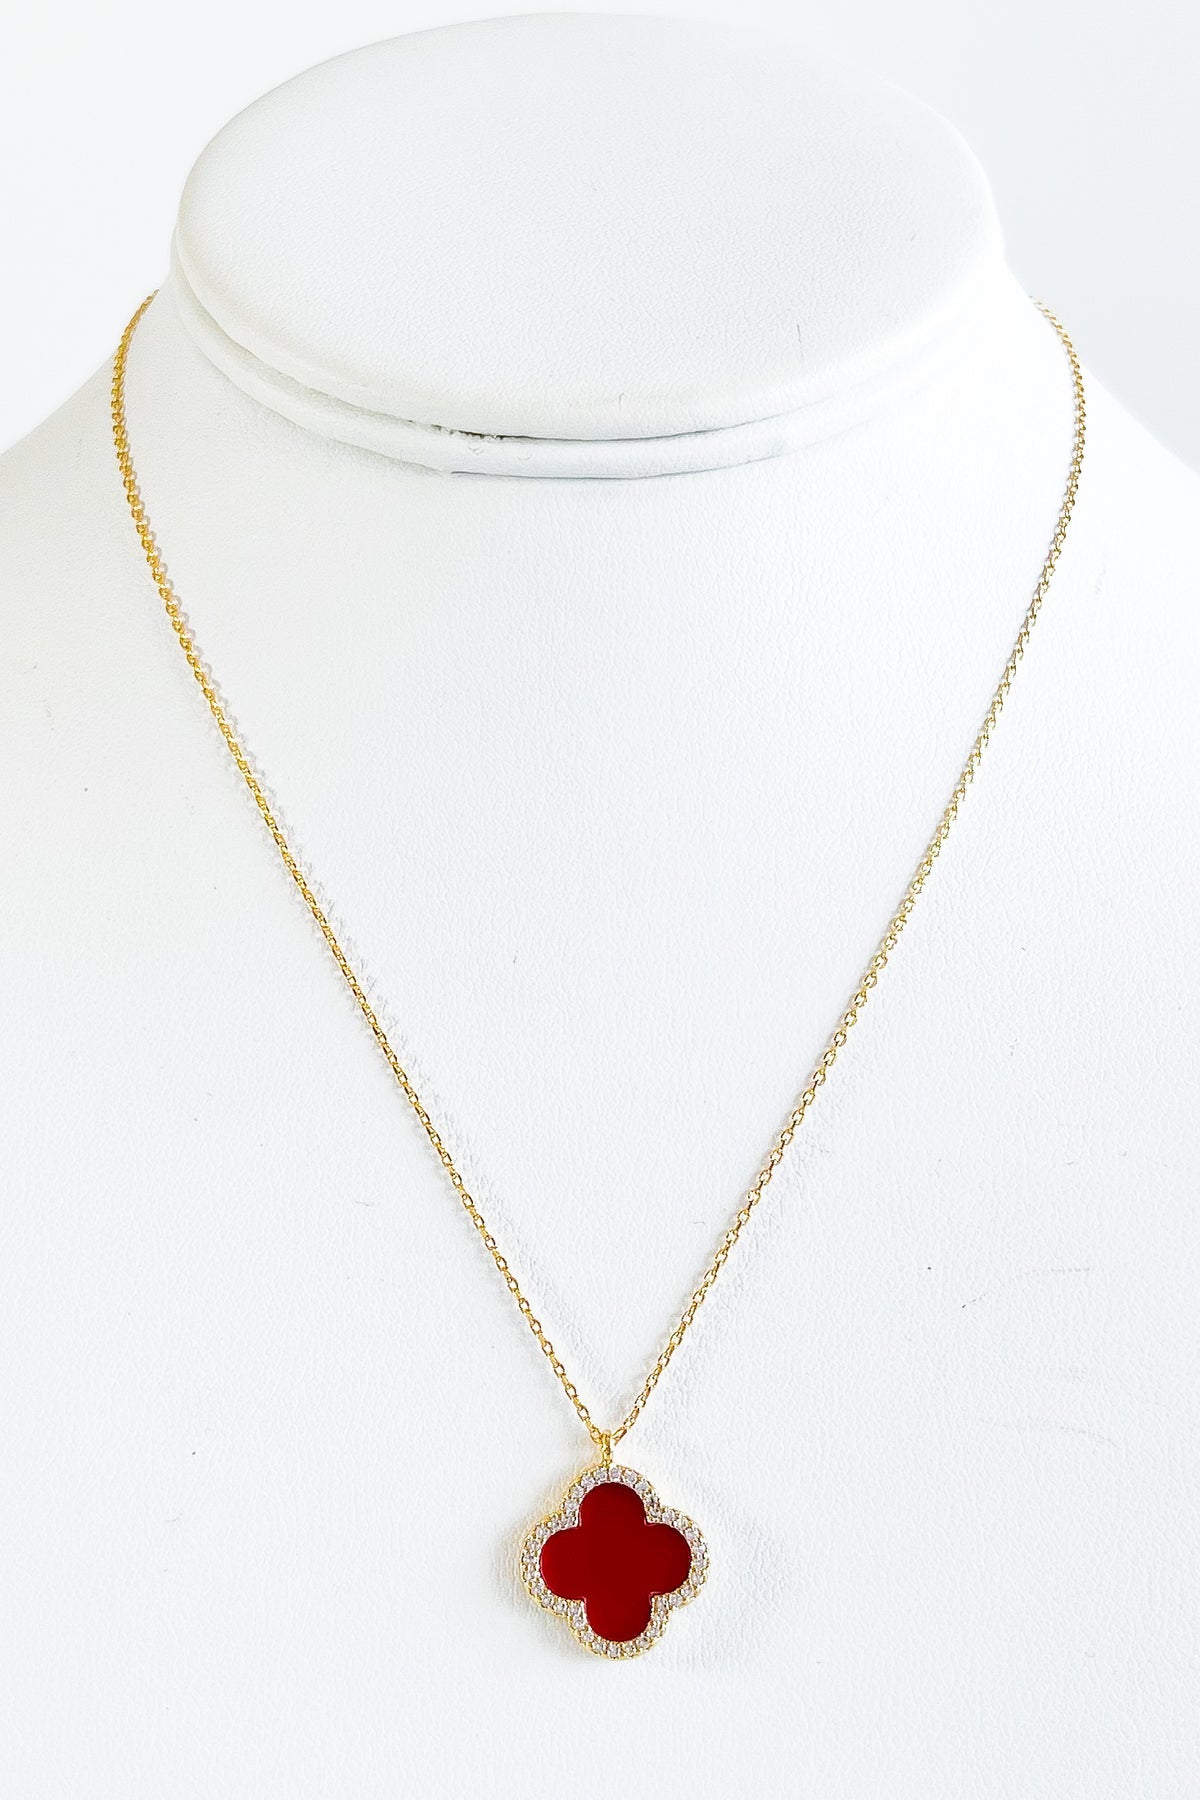 Gold Dipped Flower Pendant (Red)